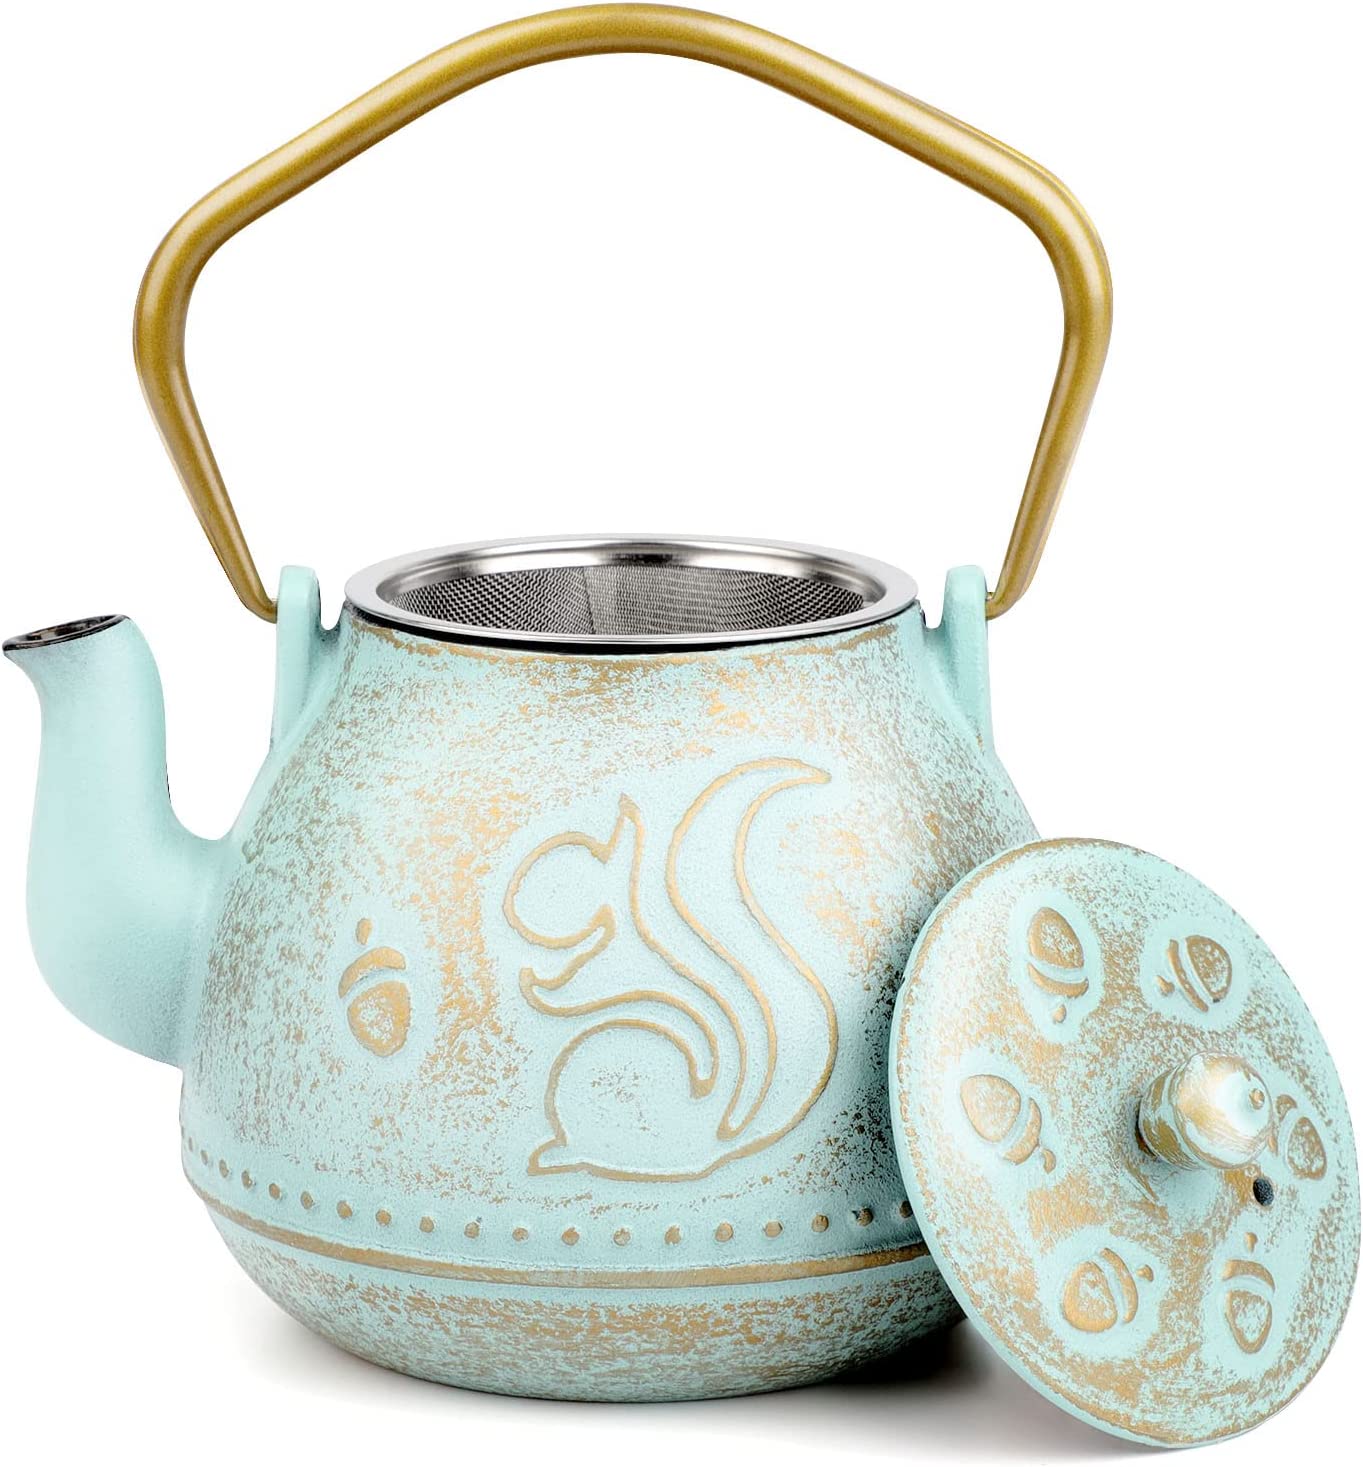 Toptier Tea Kettle for Stove Top, Cast Iron Teapot Stovetop Safe with Infusers for Loose Tea, 22 oz, Light Green